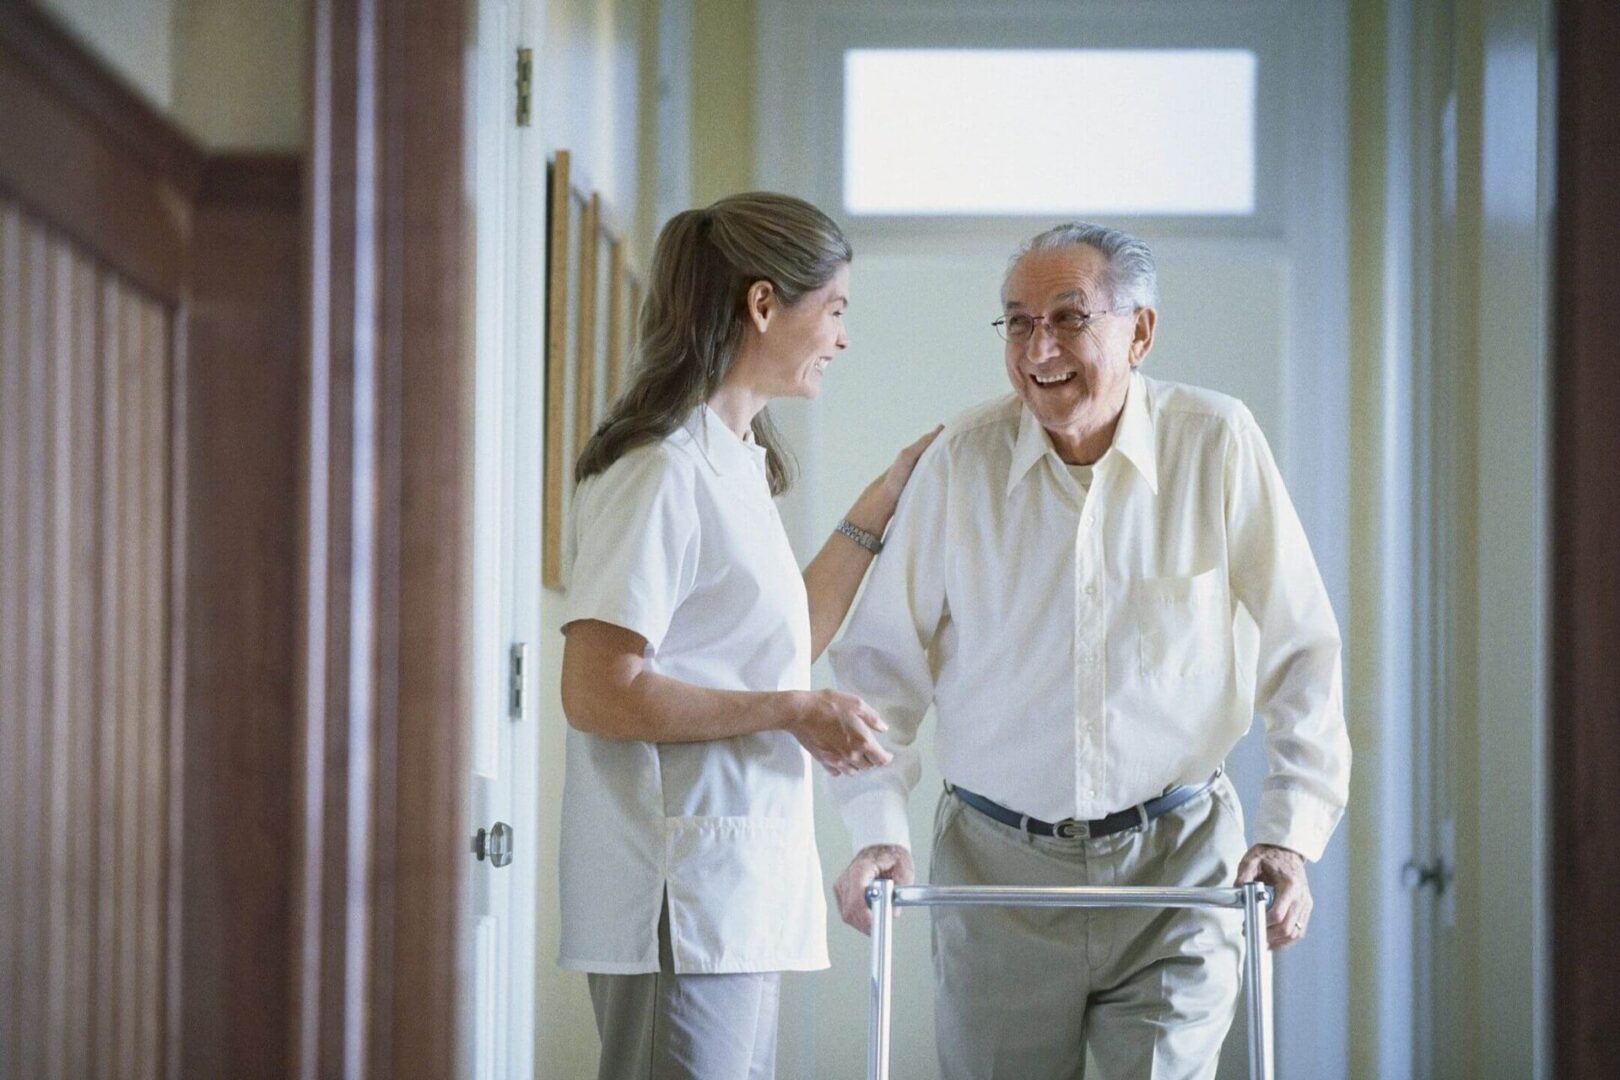 A woman and an old man walking in a hallway.